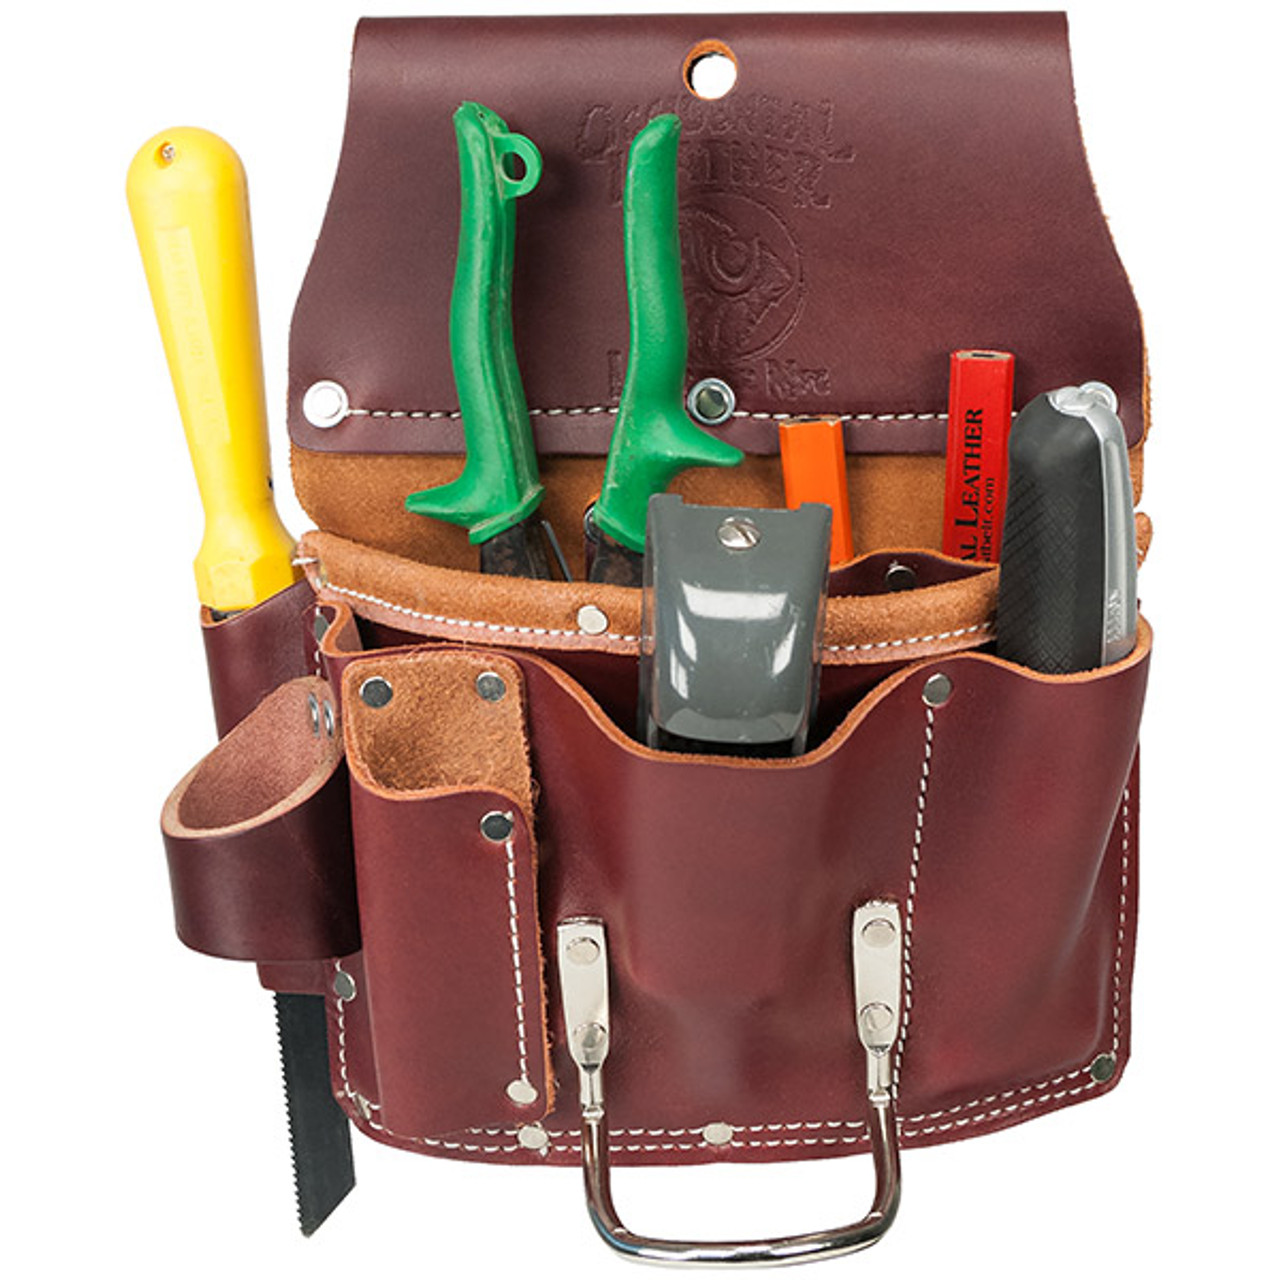 Occidental Leather 5070 - Pro Drywall Leather Pouch